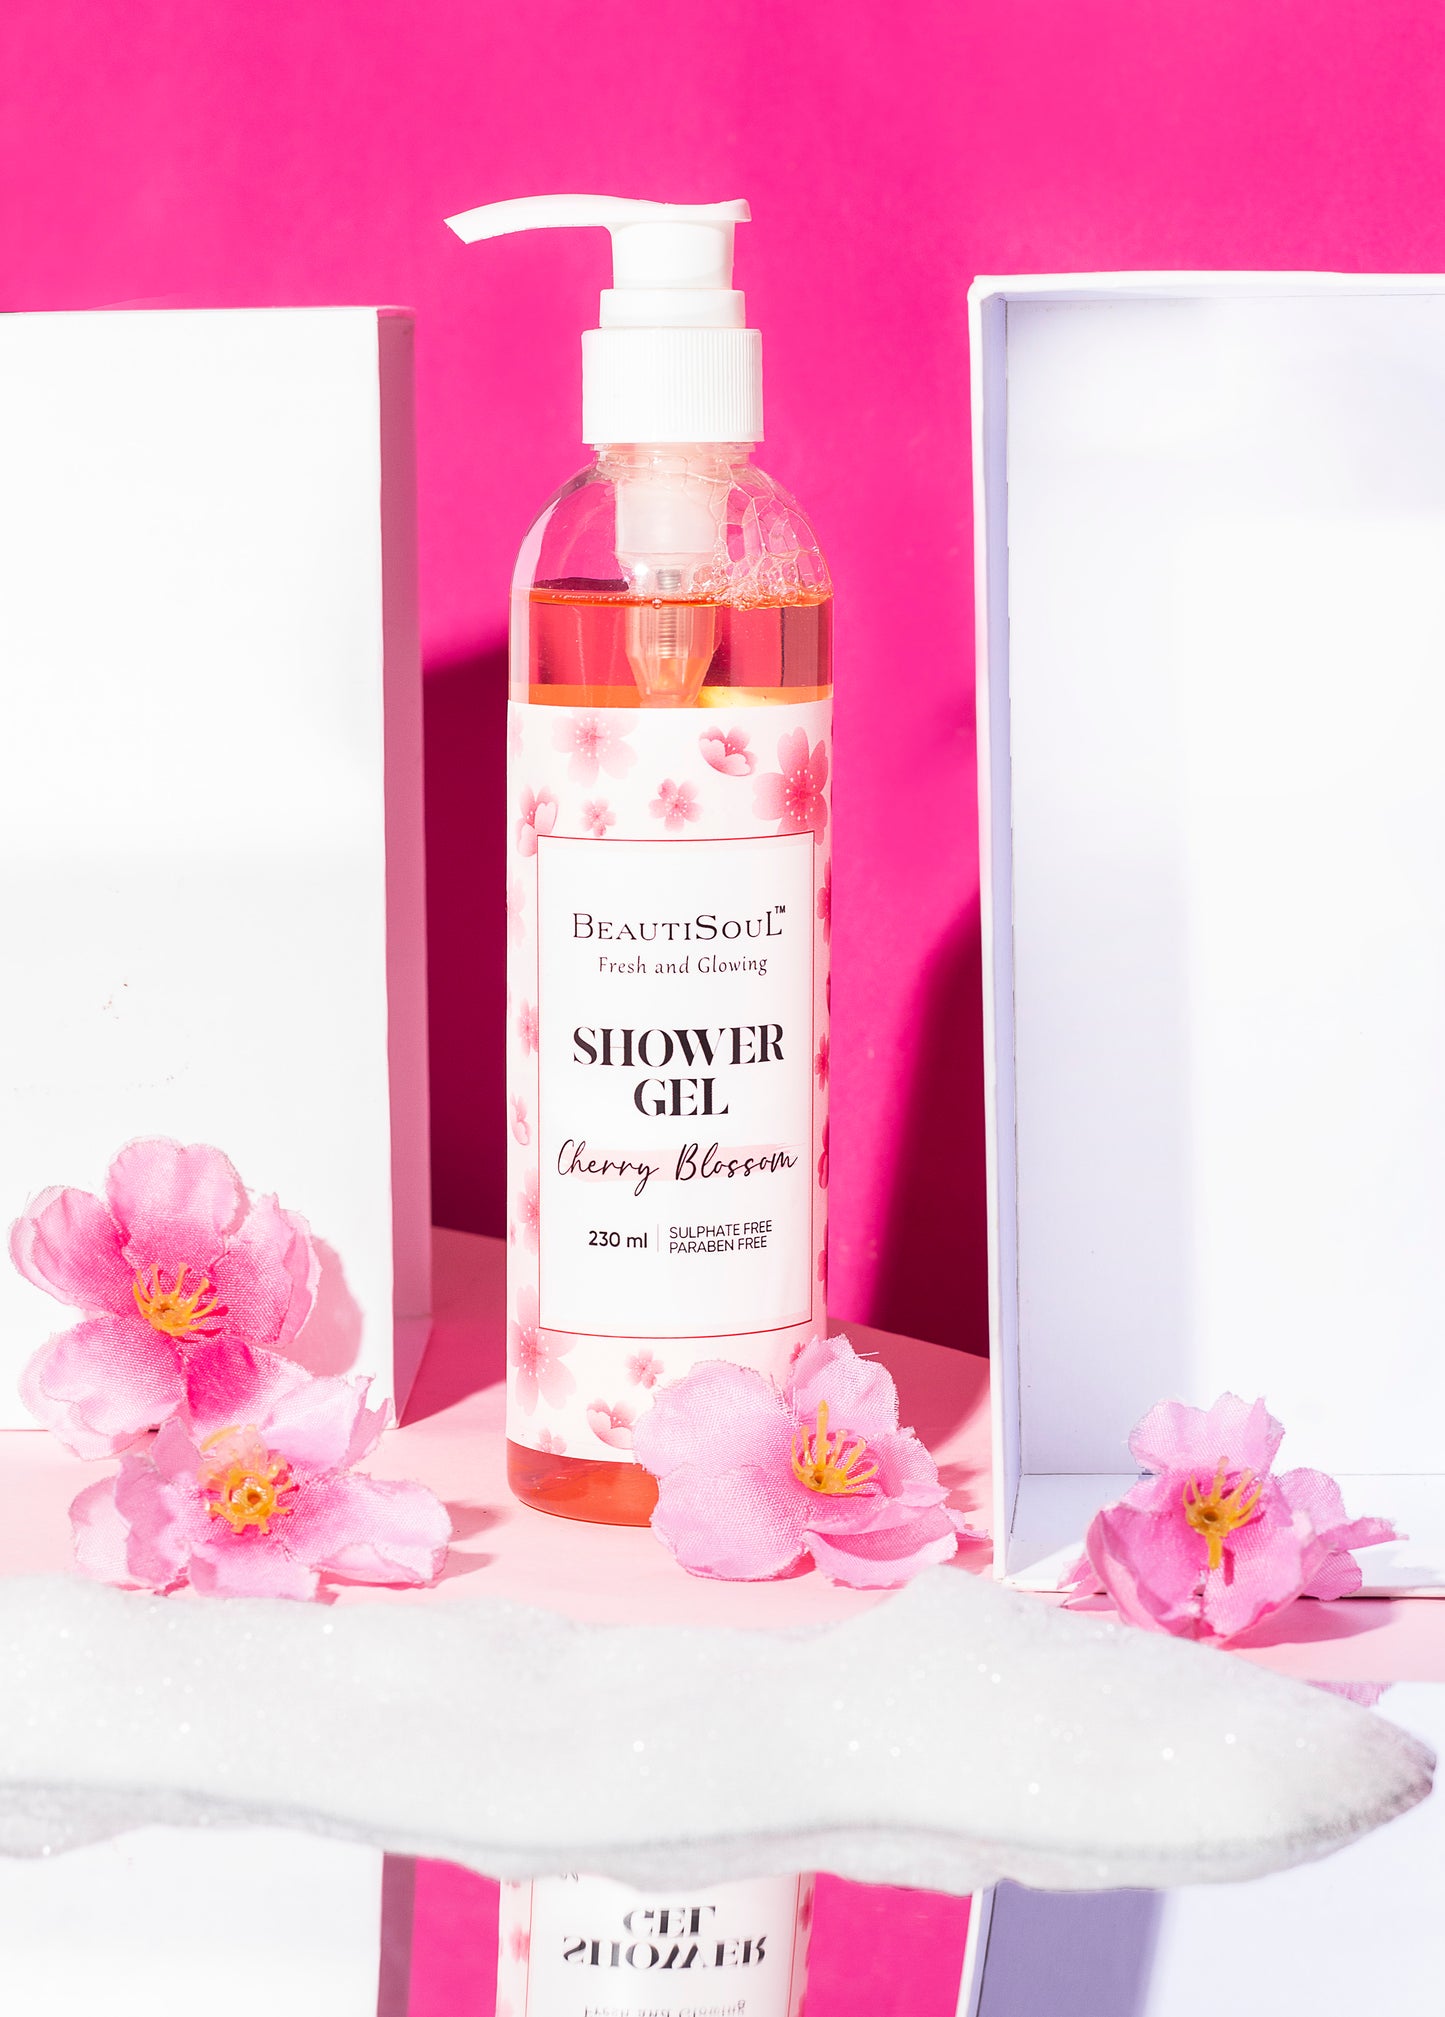 Beautisoul Cherry Blossom Shower Gel | Paraben and Sulfate Free Shower Gel with Natural Extracts for All Day Hydration - 230 ml